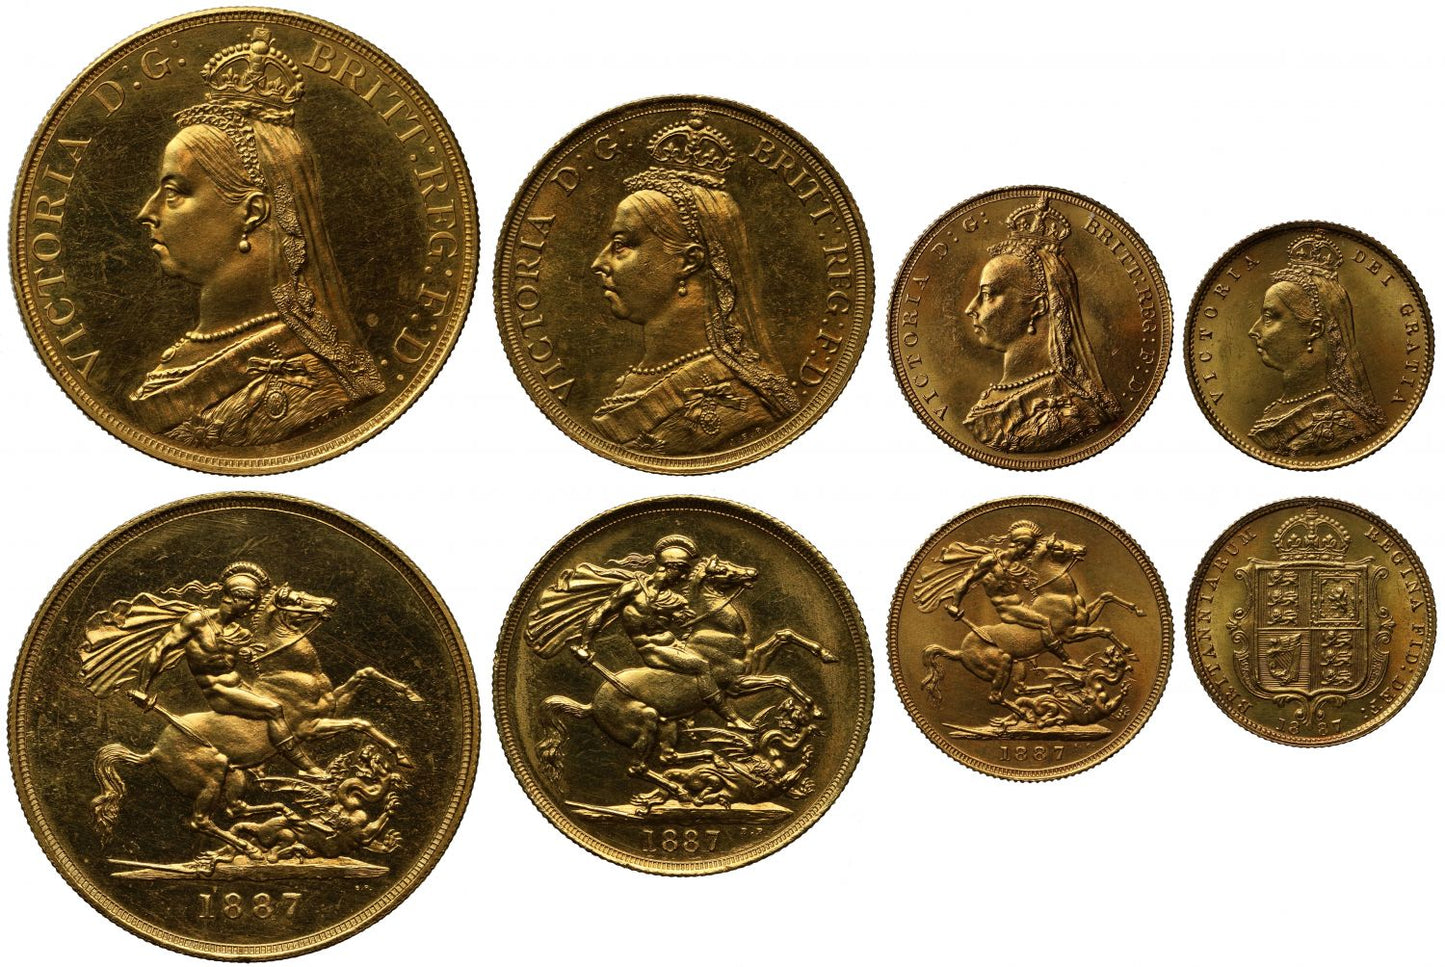 Victoria 1887 currency Set